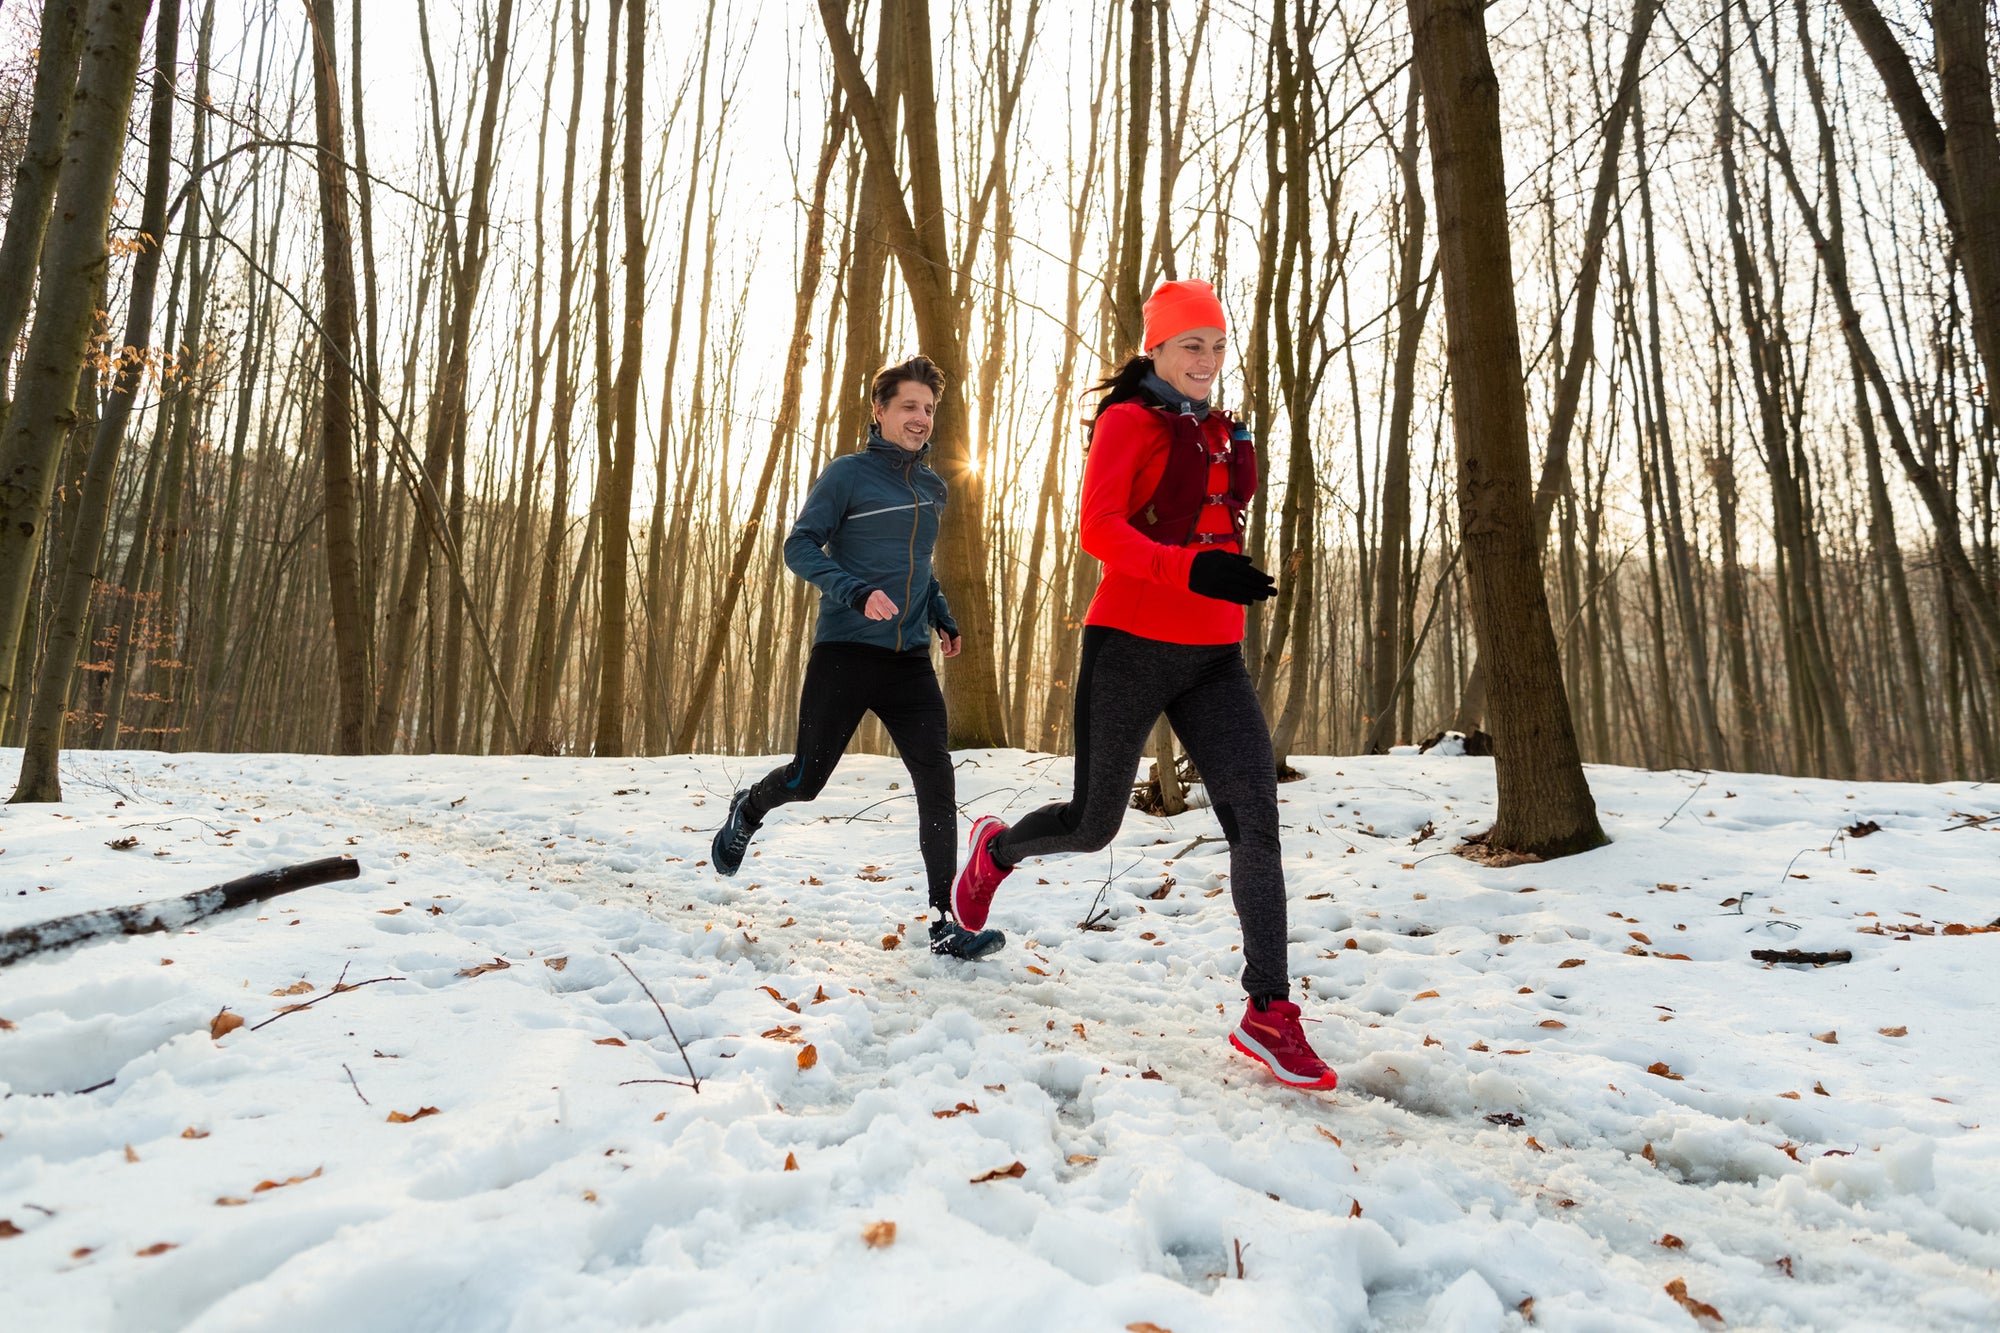 An image of a man and a woman beating the winter blues by going for a run in a snowy, woody path in early morning light.